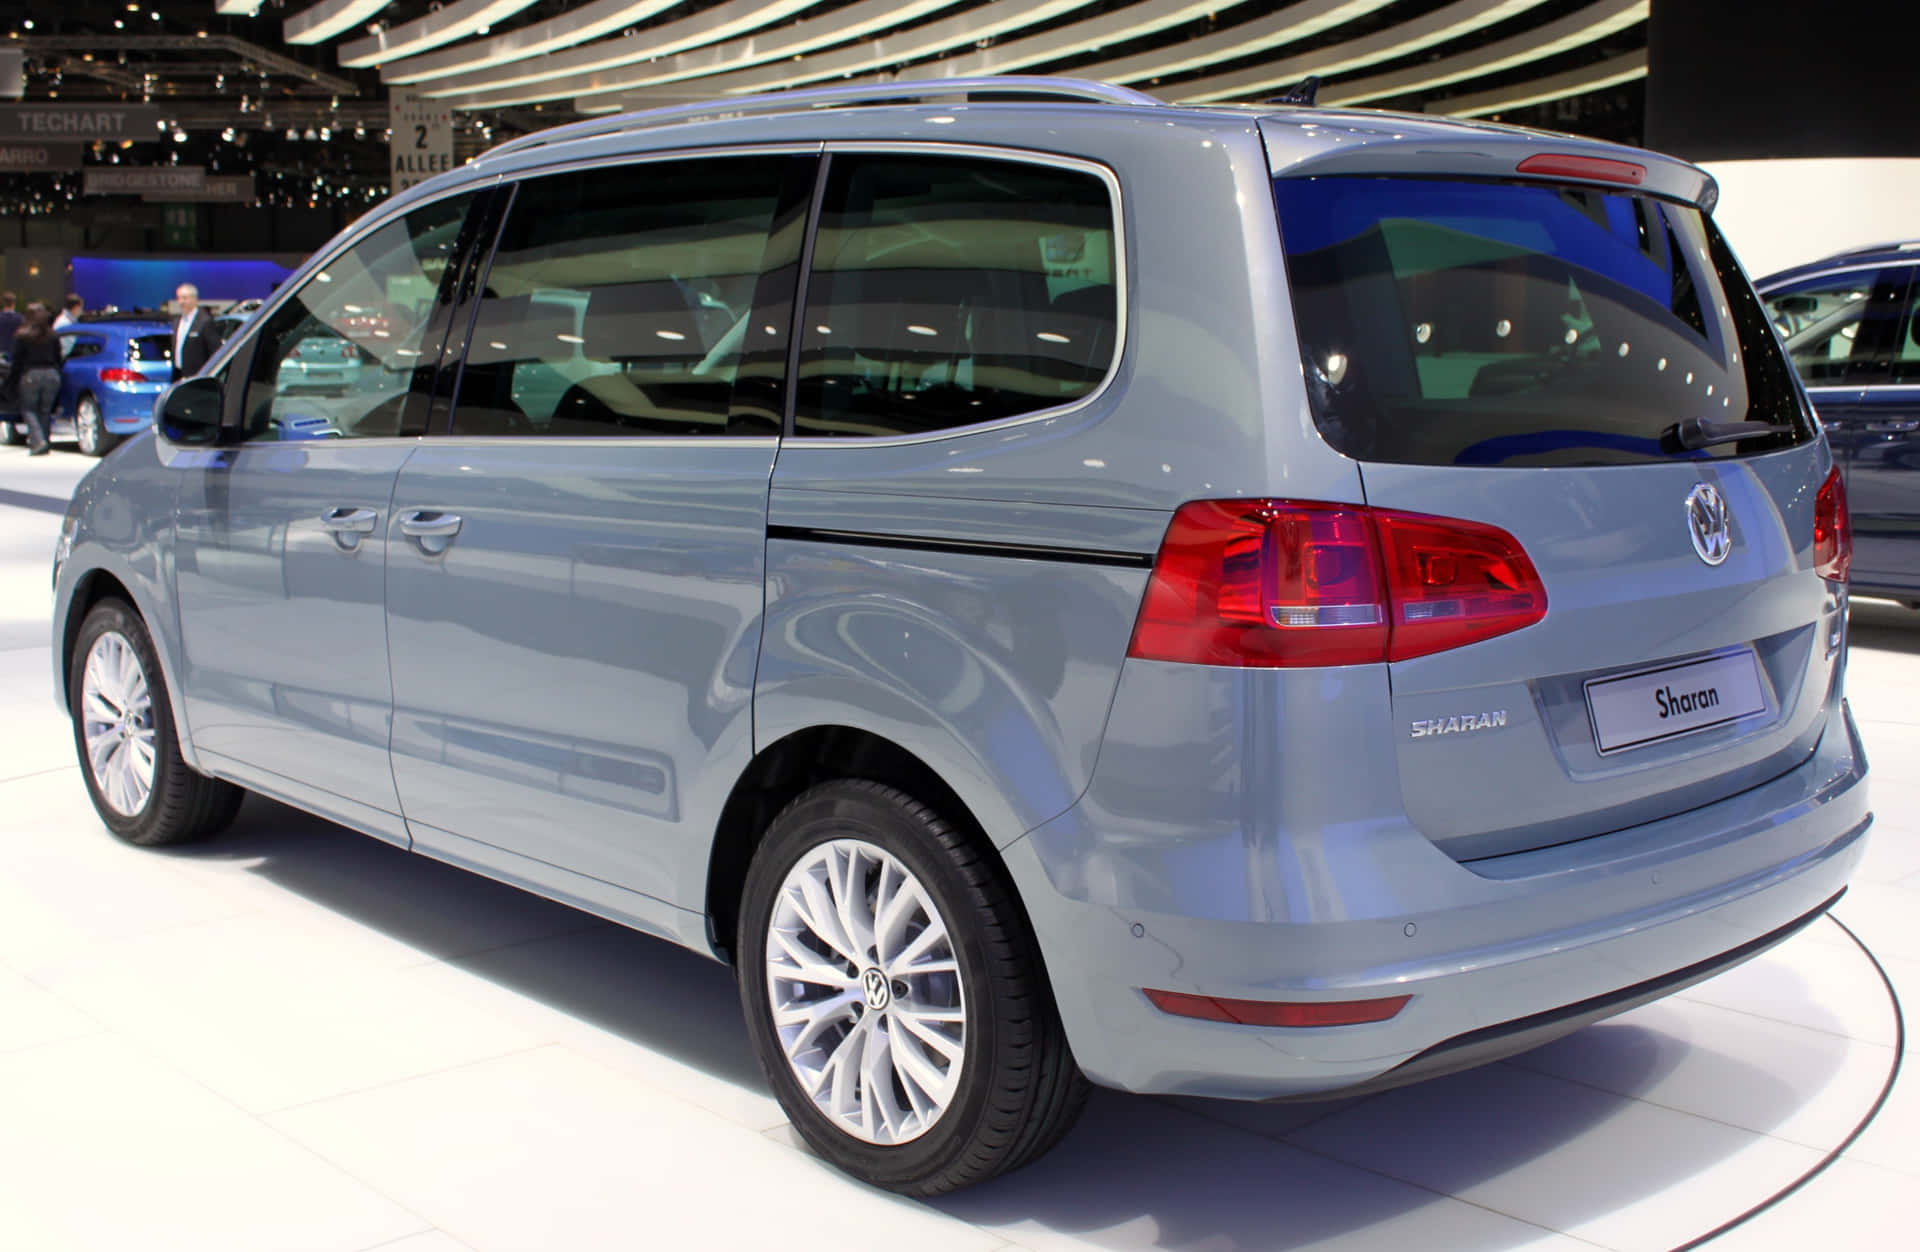 Caption: Sleek And Modern Volkswagen Sharan Parked By The Water Wallpaper